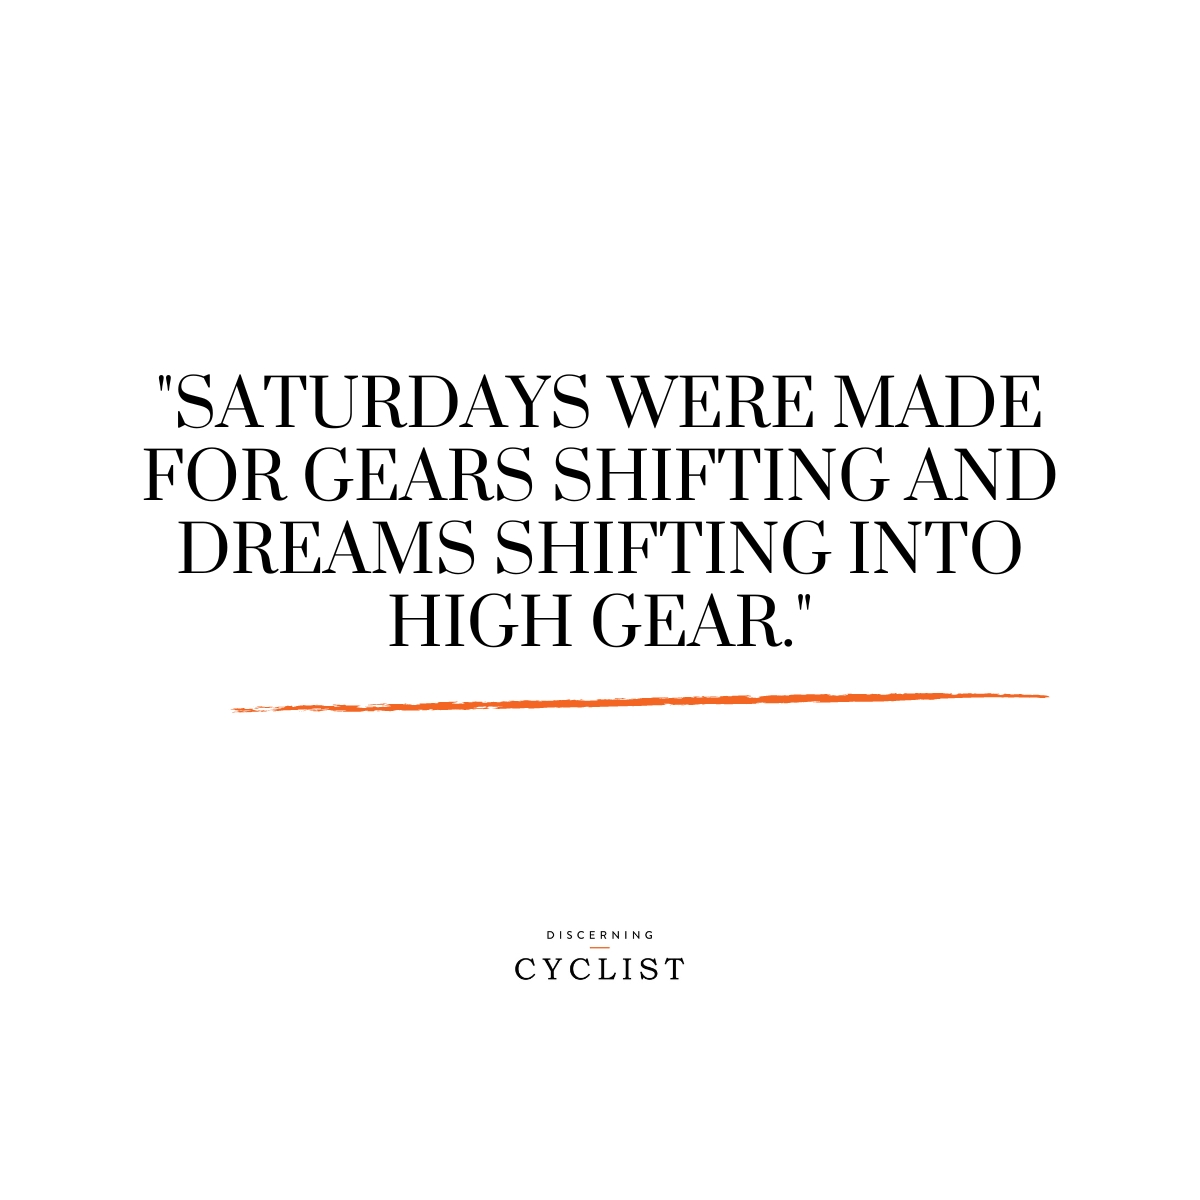 "Saturdays were made for gears shifting and dreams shifting into high gear."